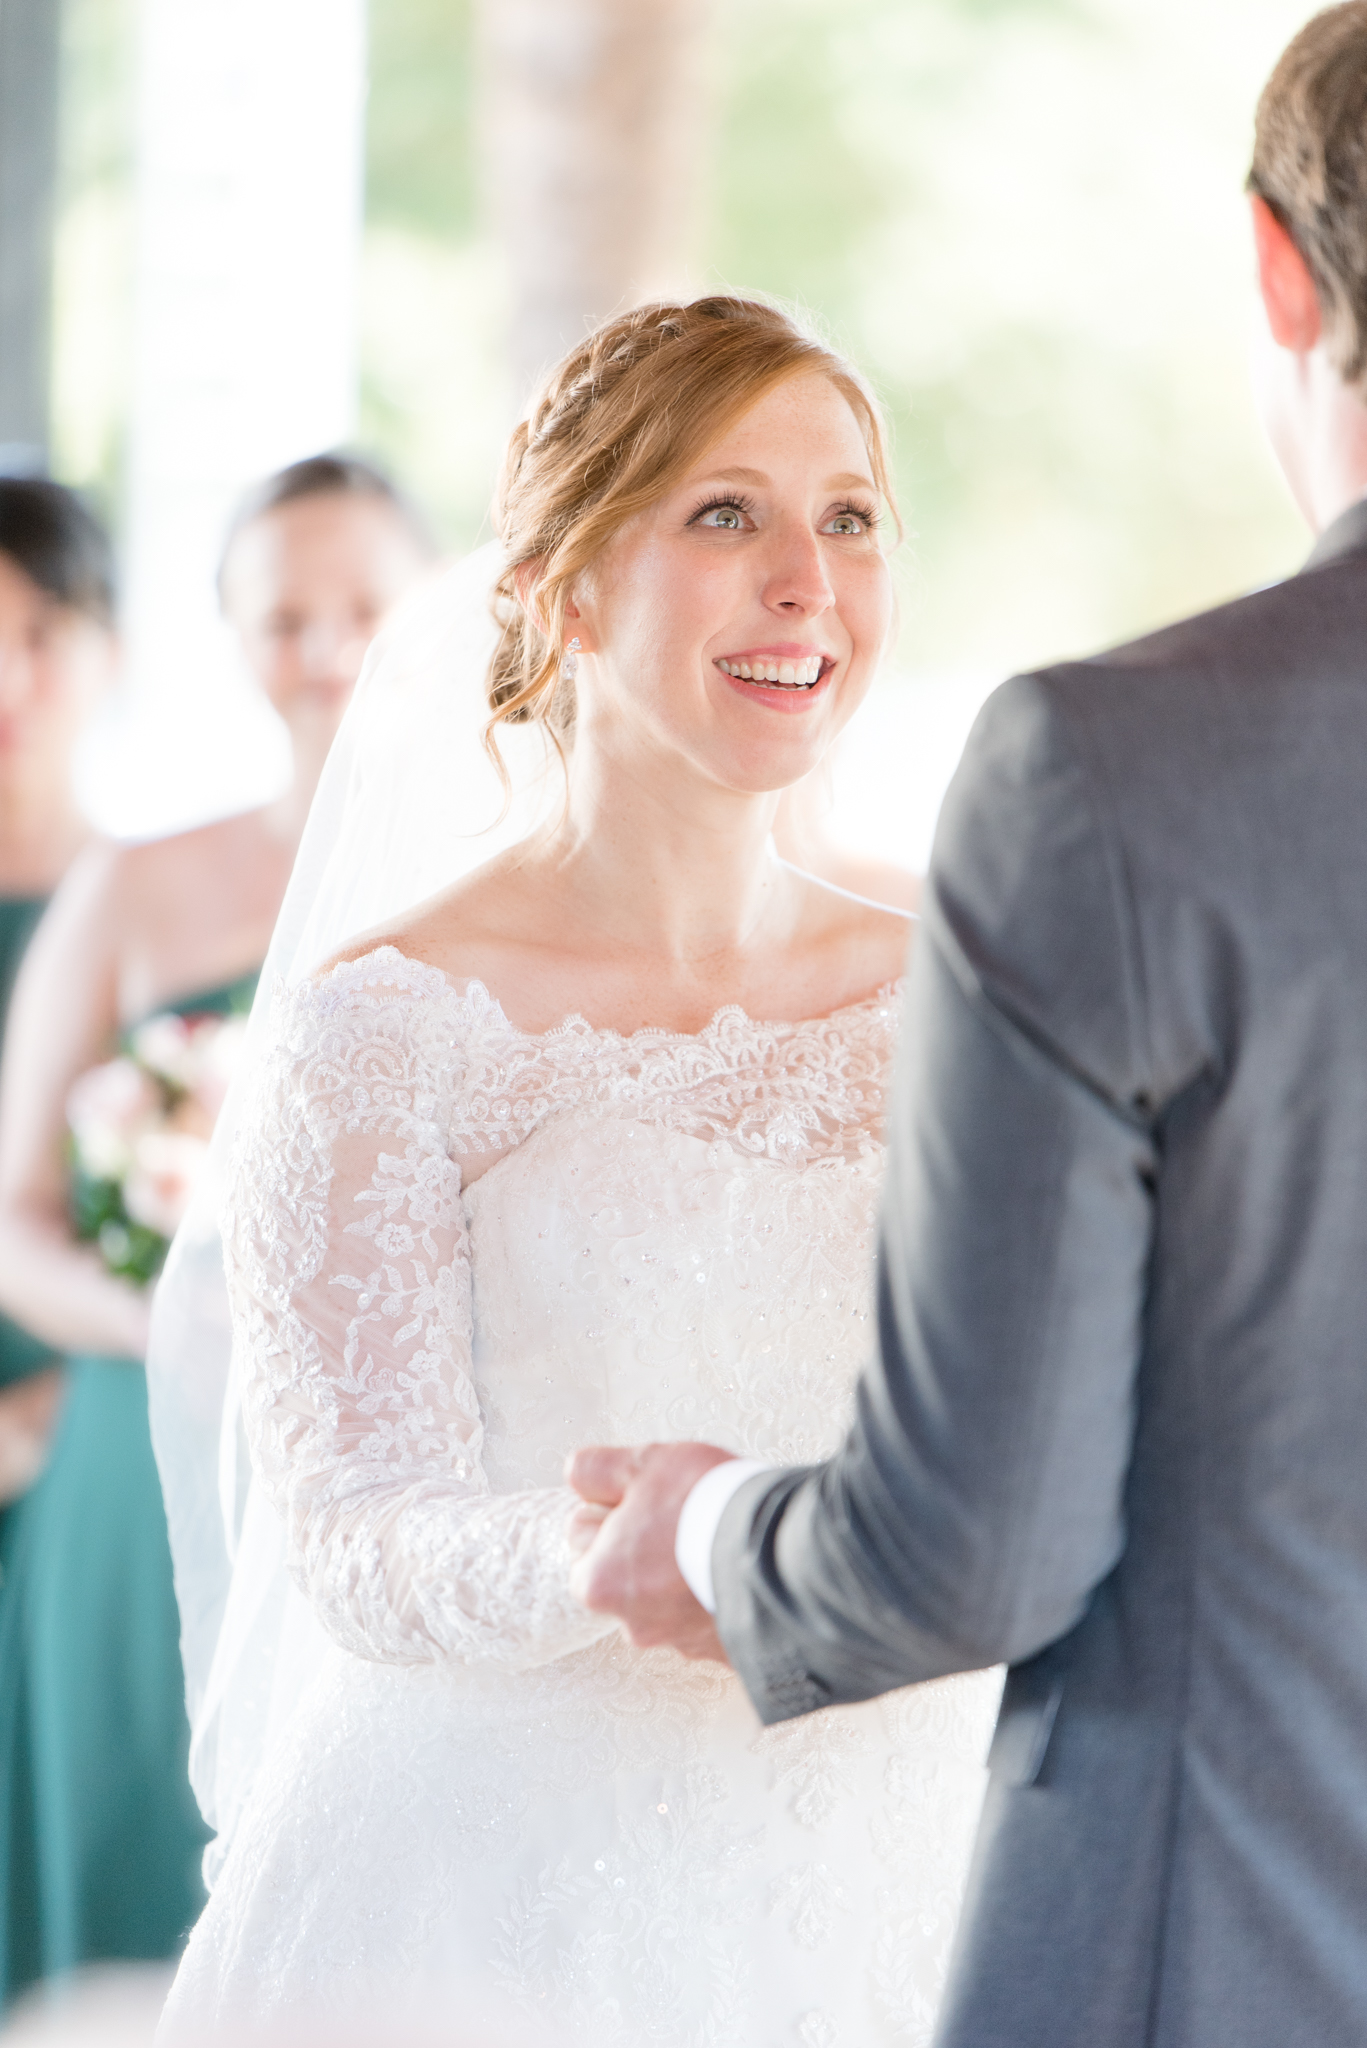 Bride smiles at groom during wedding ceremony.